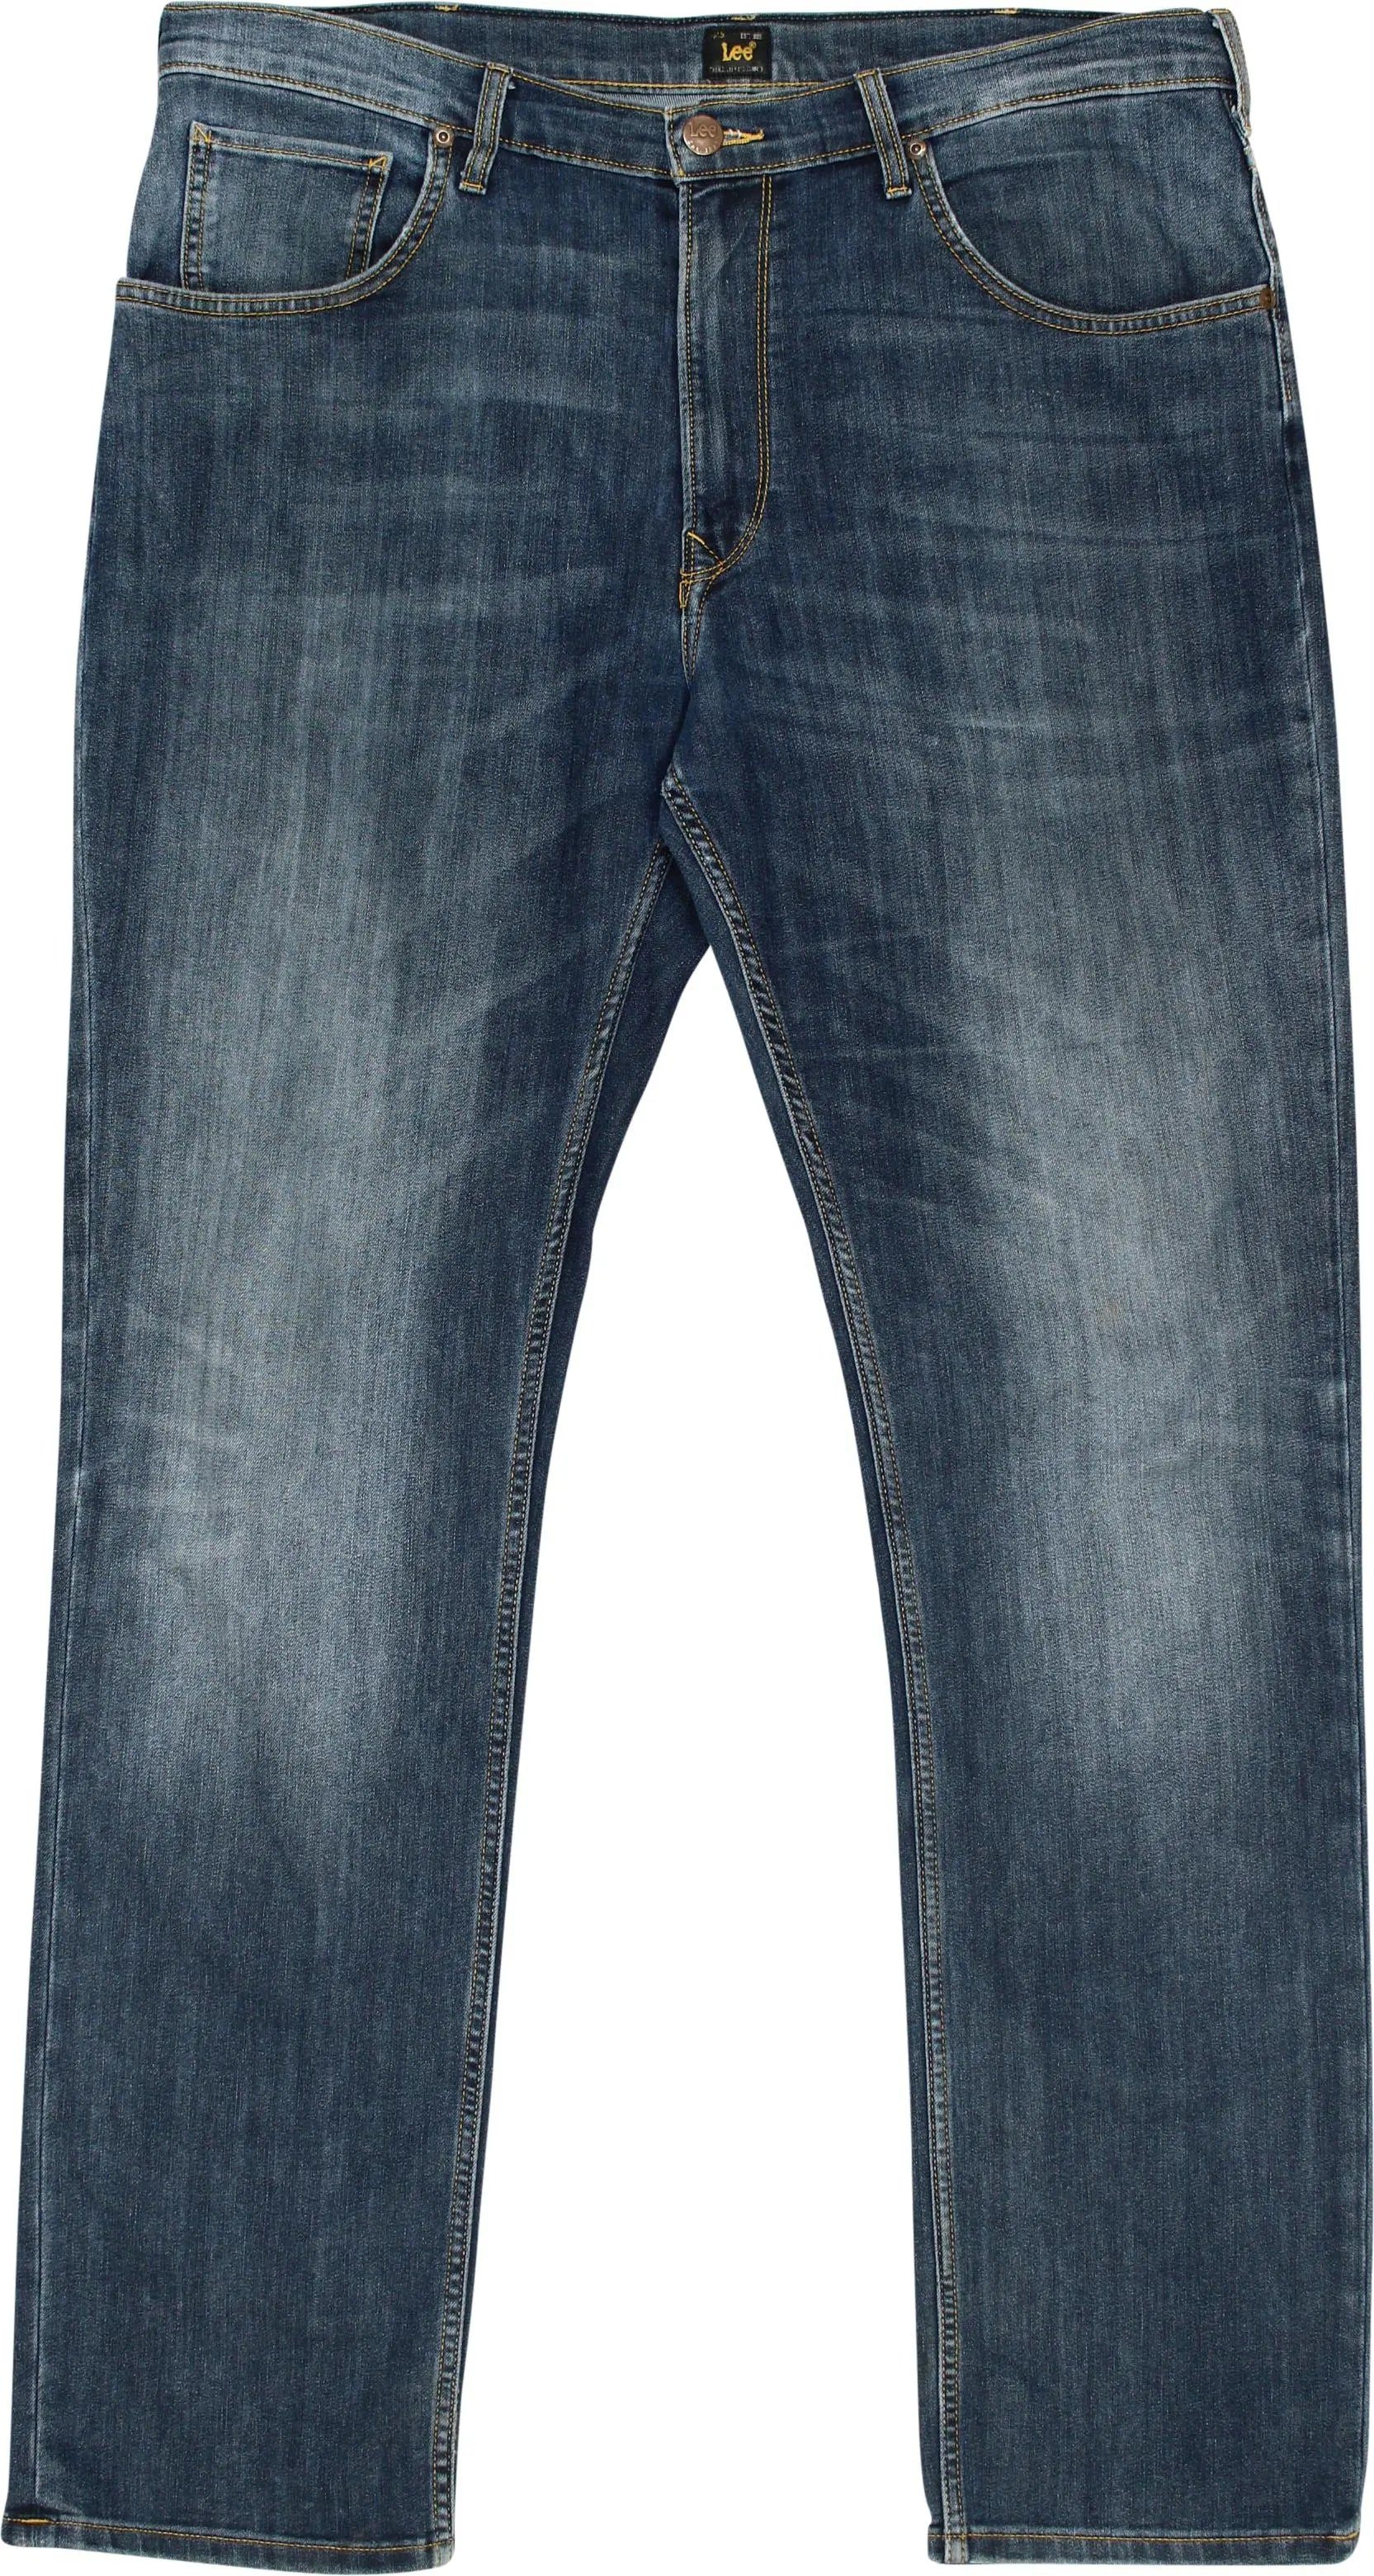 Lee - Brooklyn Jeans by Lee- ThriftTale.com - Vintage and second handclothing